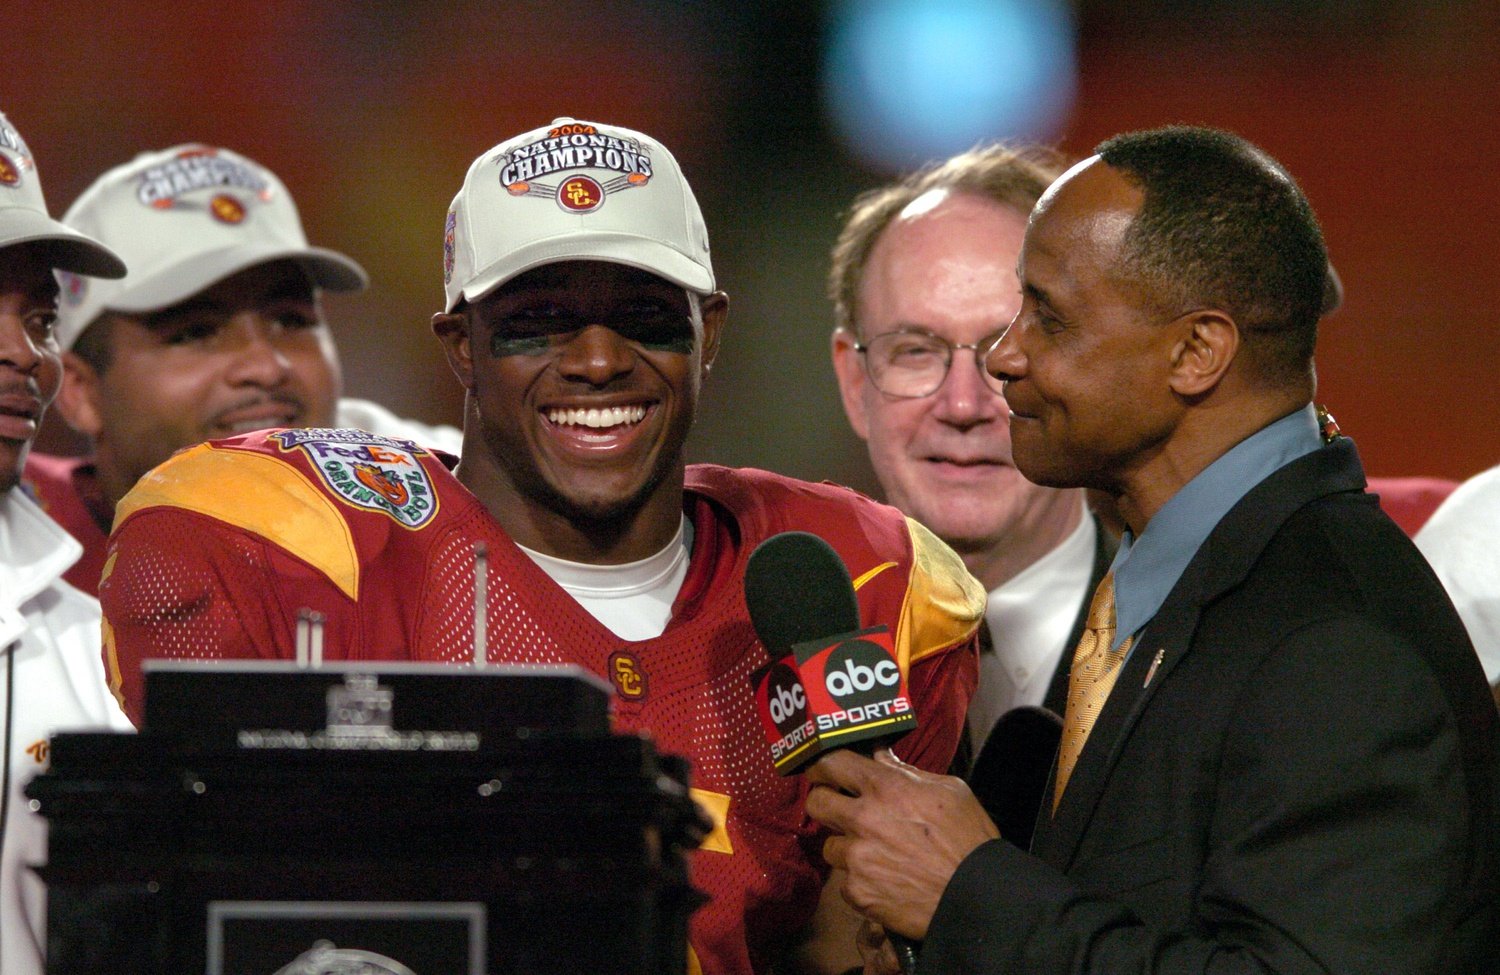 Reggie Bush is interviewed by ABC broadcaster Lynn Swann after 55-19 victory over Oklahoma in the FedEx Orange Bowl in the BCS National Championship.